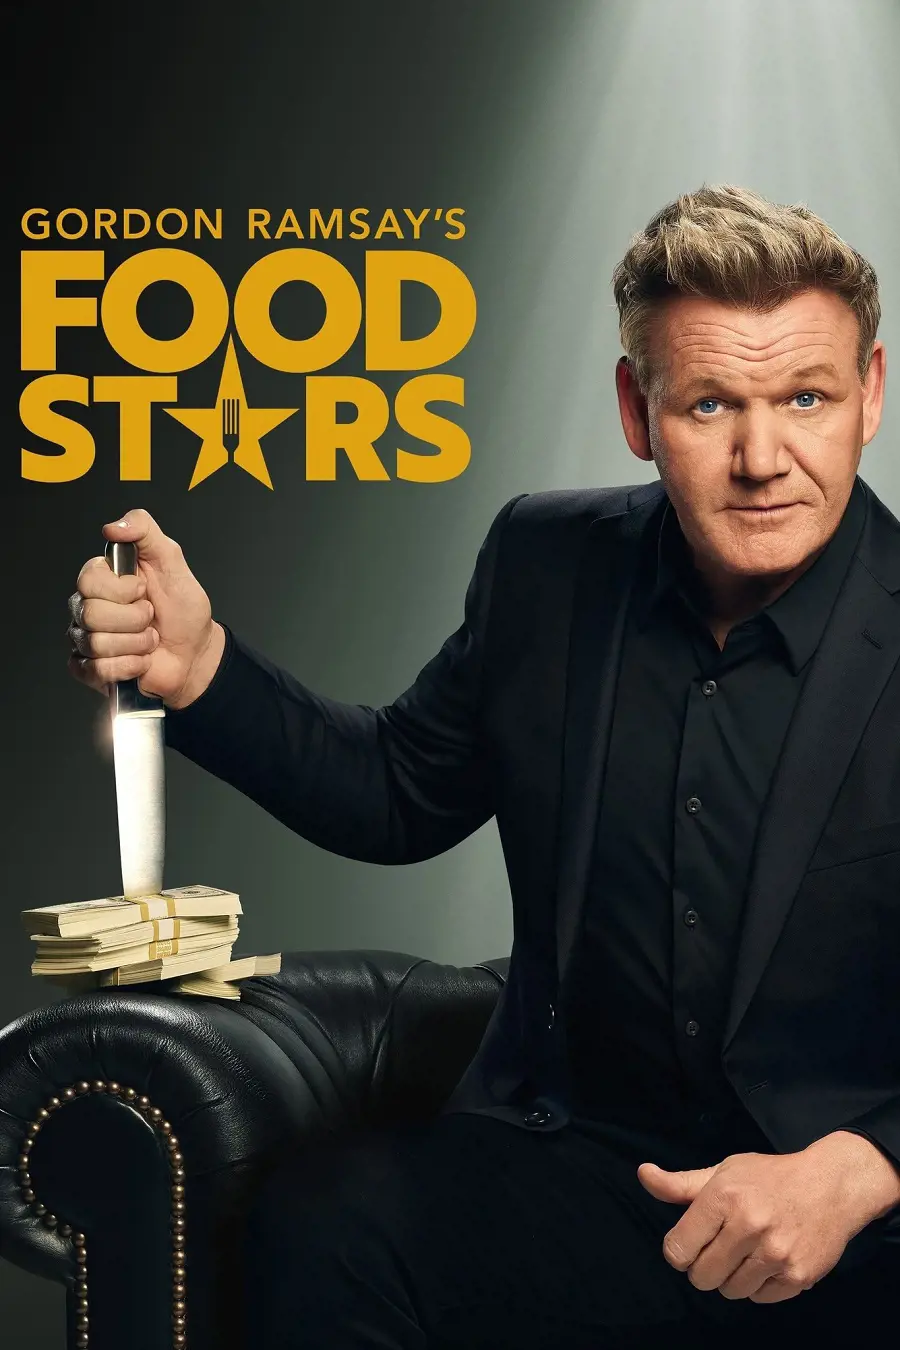 The culinary challenge series Gordon Ramsay Food Stars runs for ten weeks, and each week the contestant go home as they cannot make an impression on Gordon